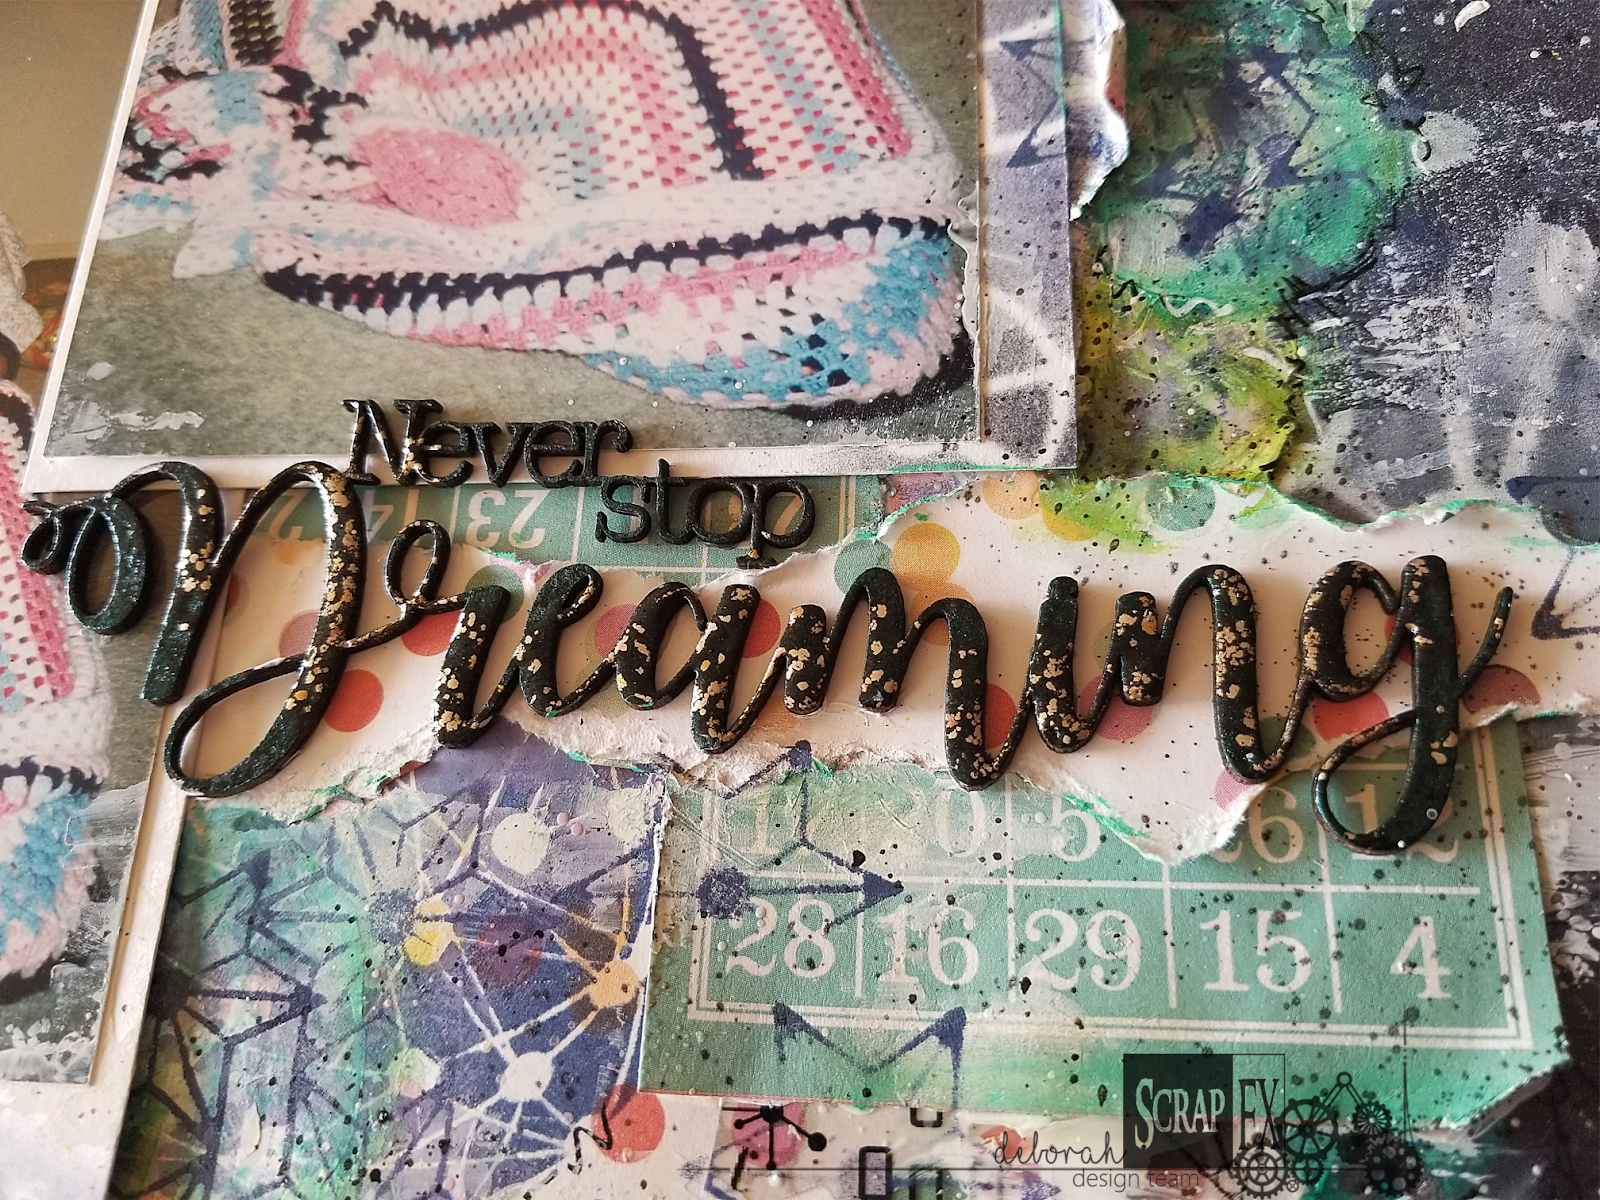 The 'never Stop Dreaming' Wordlet Looks Fabulous - Scrapbooking , HD Wallpaper & Backgrounds